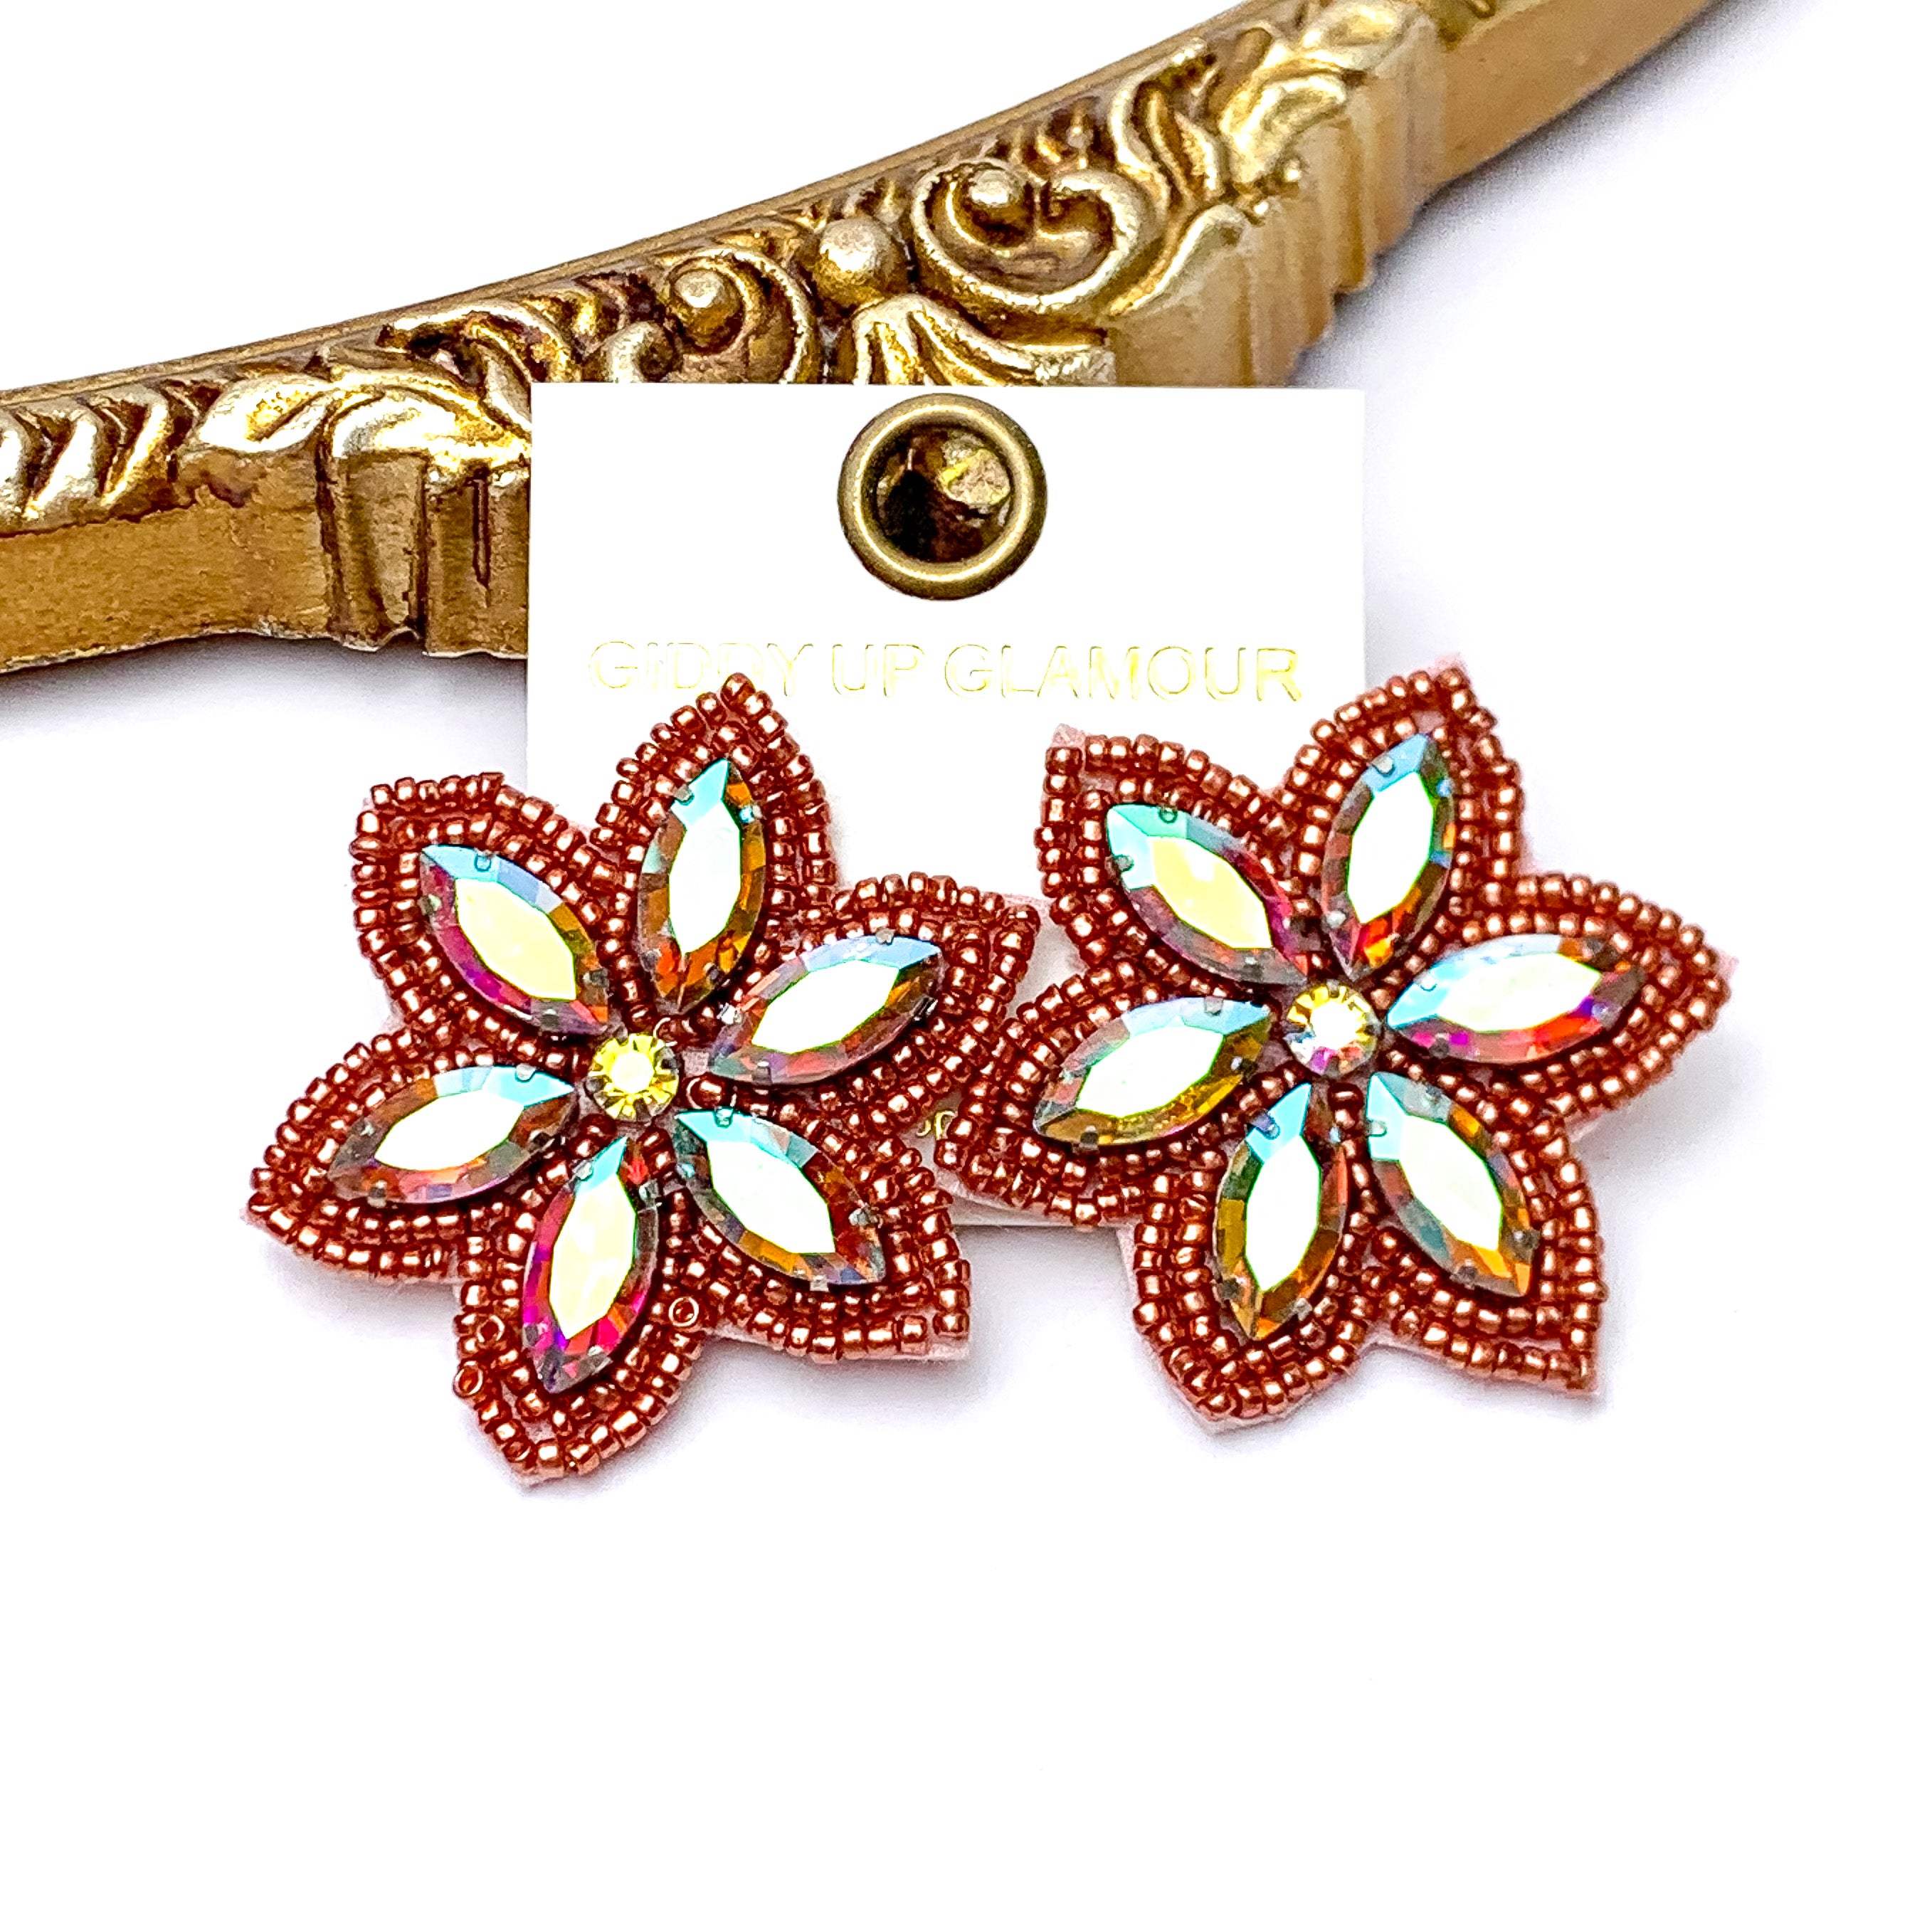 Prismatic Petals Seed Bead Flower Stud Earrings with AB stones in Rose Gold